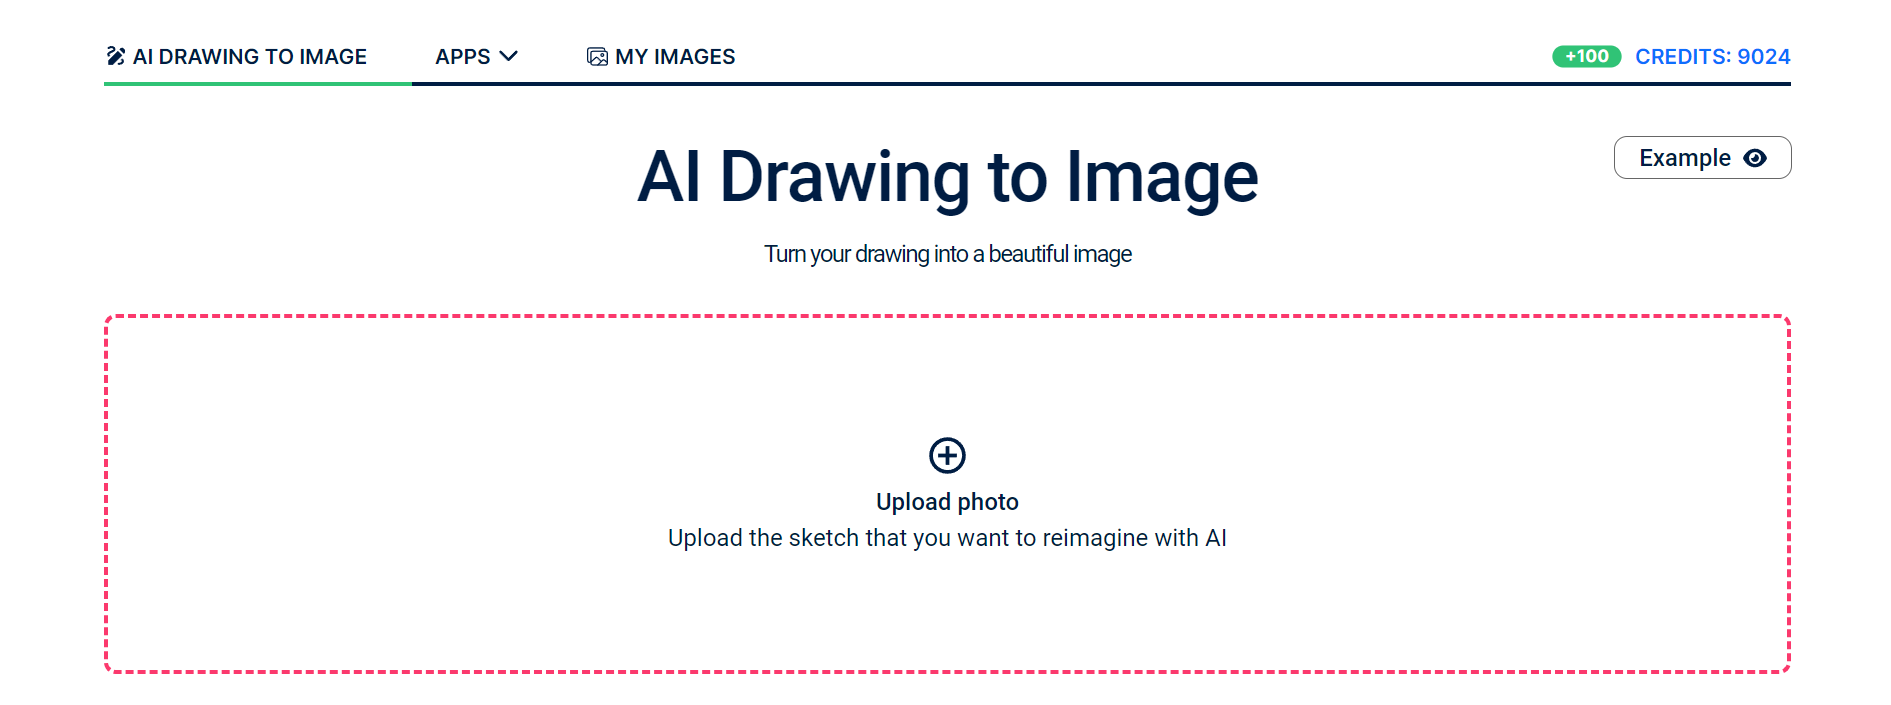 Revolutionizing Child Art - Explore the "AI Drawing To Image" Application